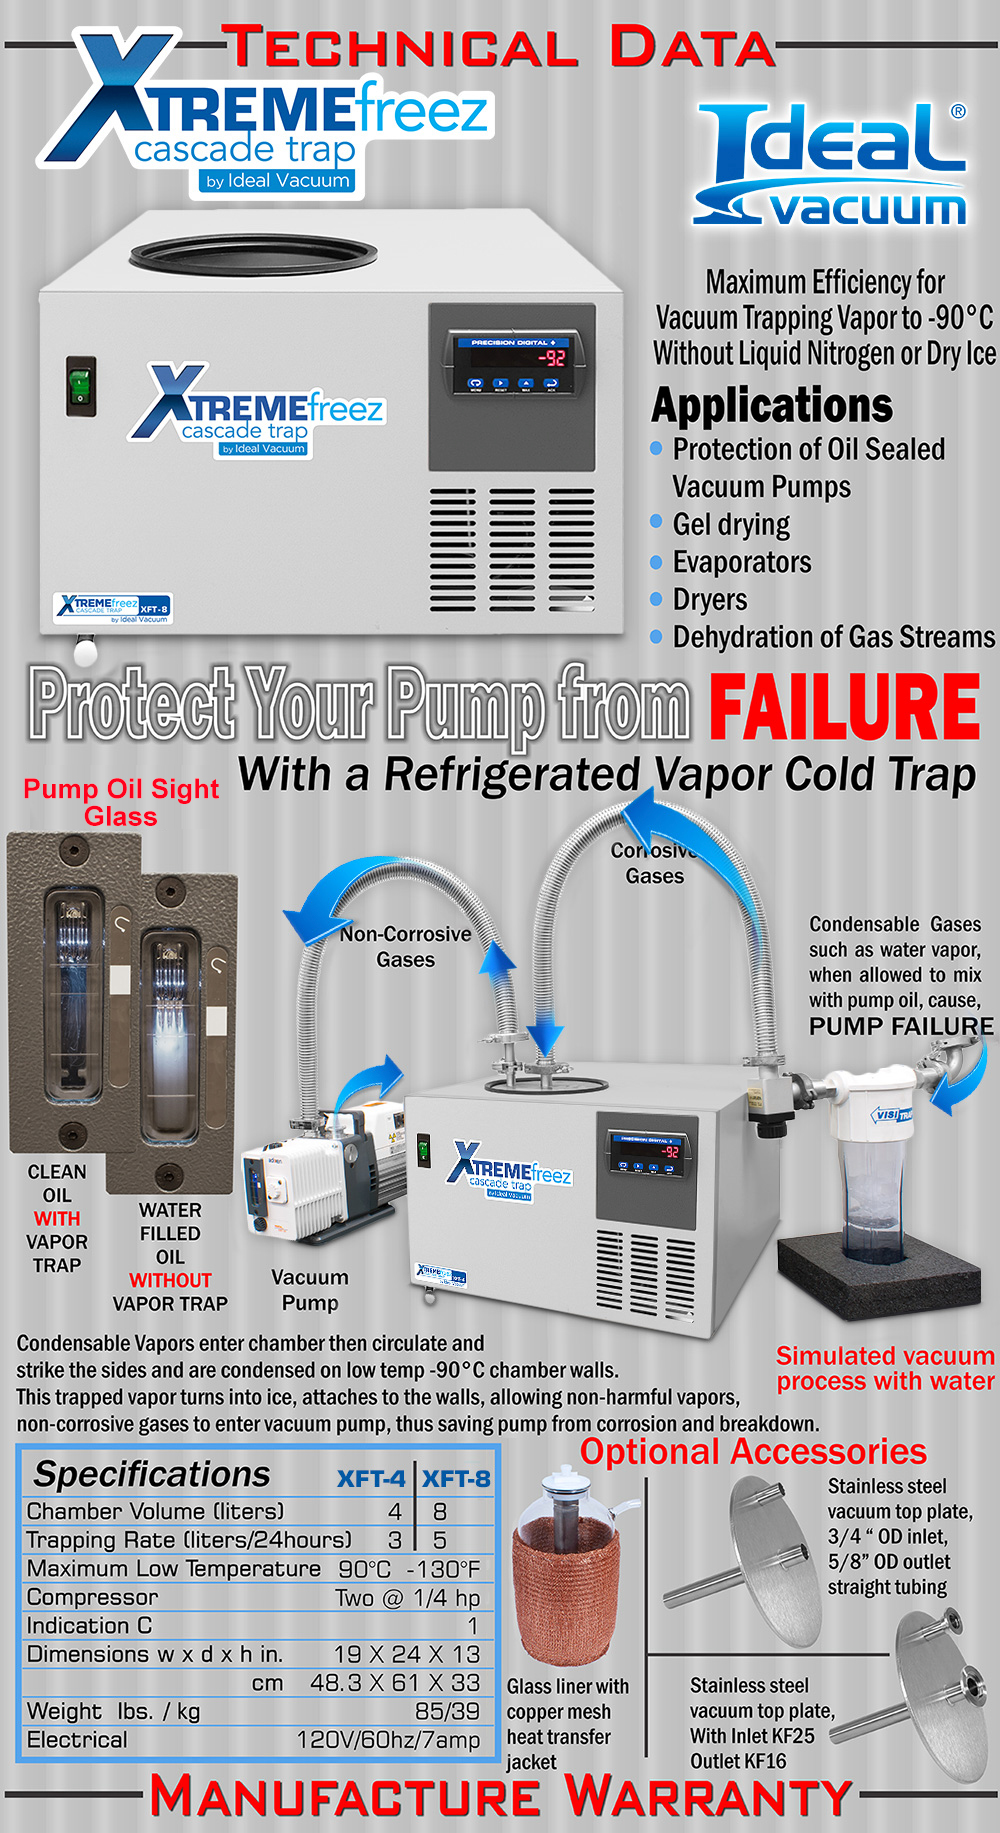 XtremeFreez Cascade Trap freezes down to -90 degrees celsius without liquid Nitrogen or dry ice the Xtreme Freez used as vacuum traping vapor